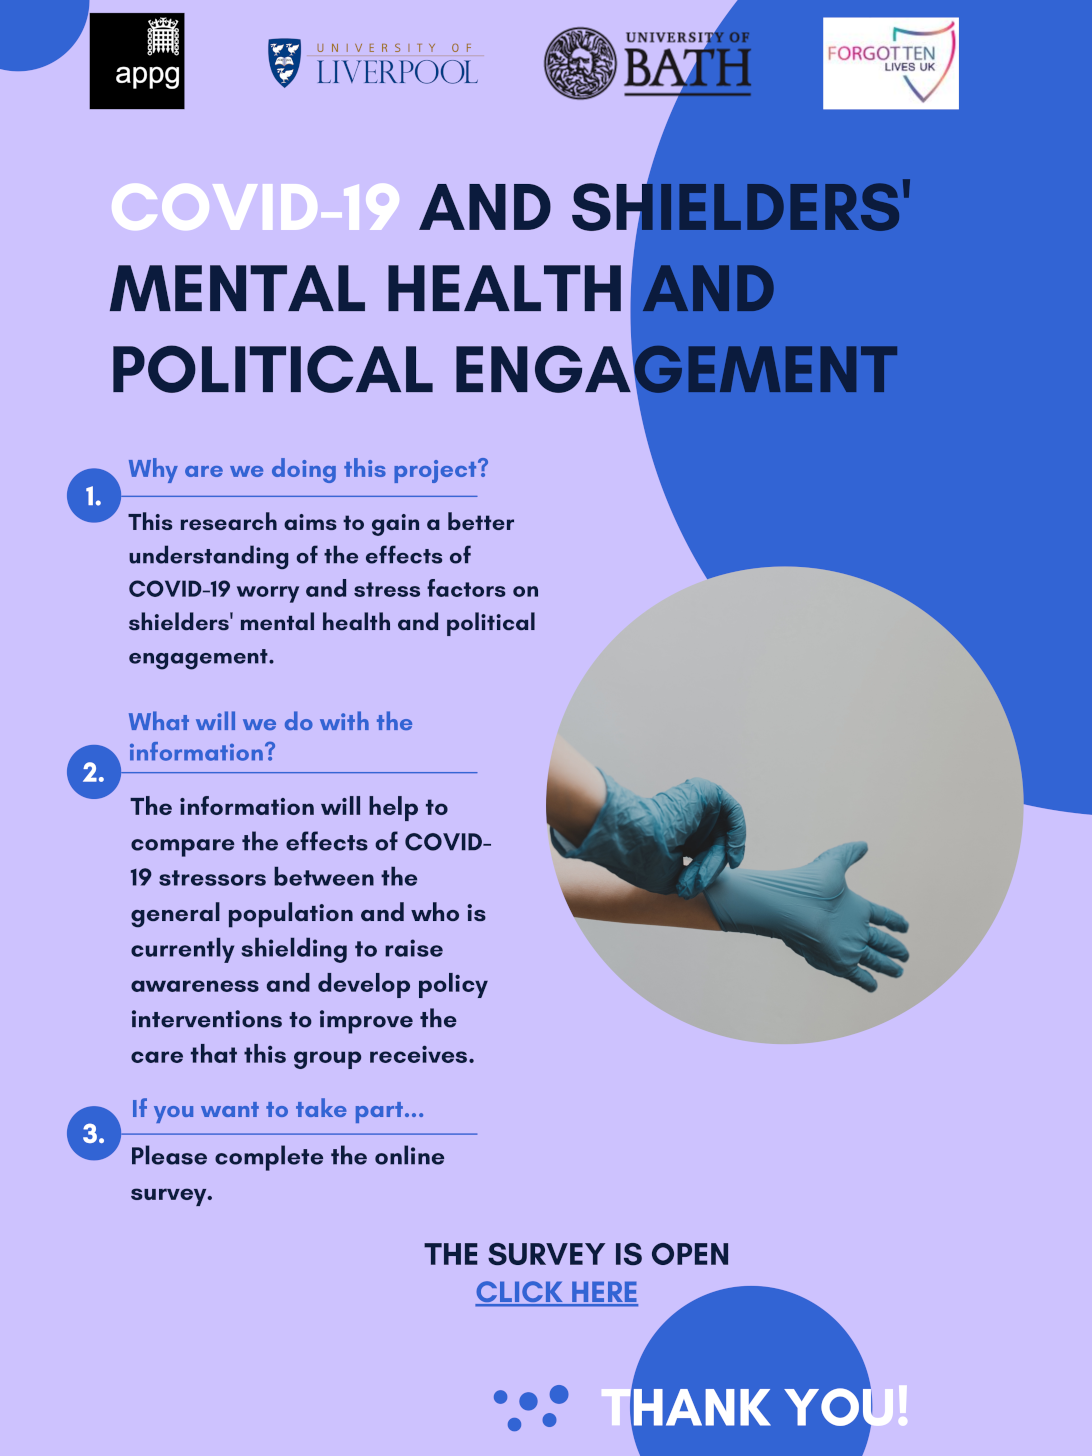 Covid-19 and Shielders' Mental Health and Political Engagement Survey